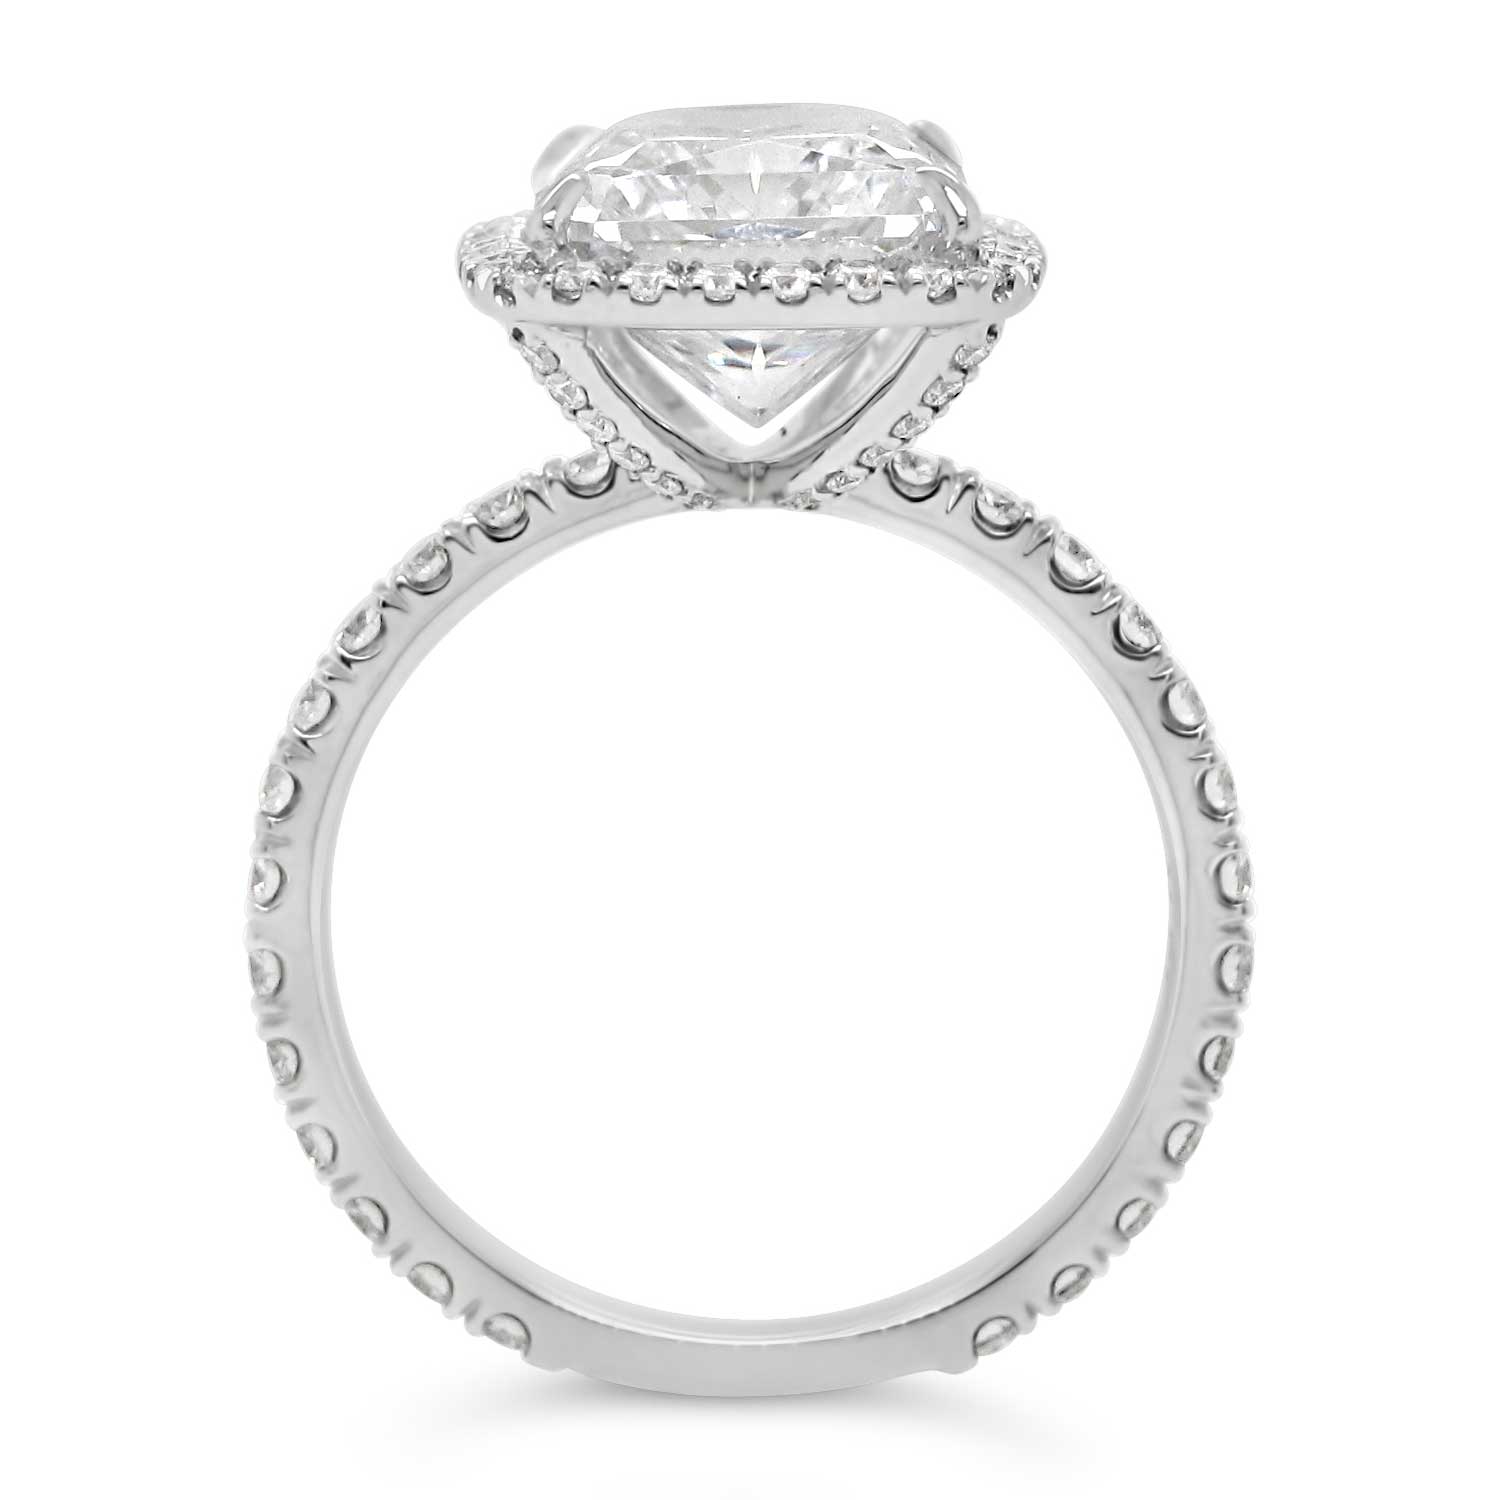 3.5ct radiant cut with diamond halo and shank